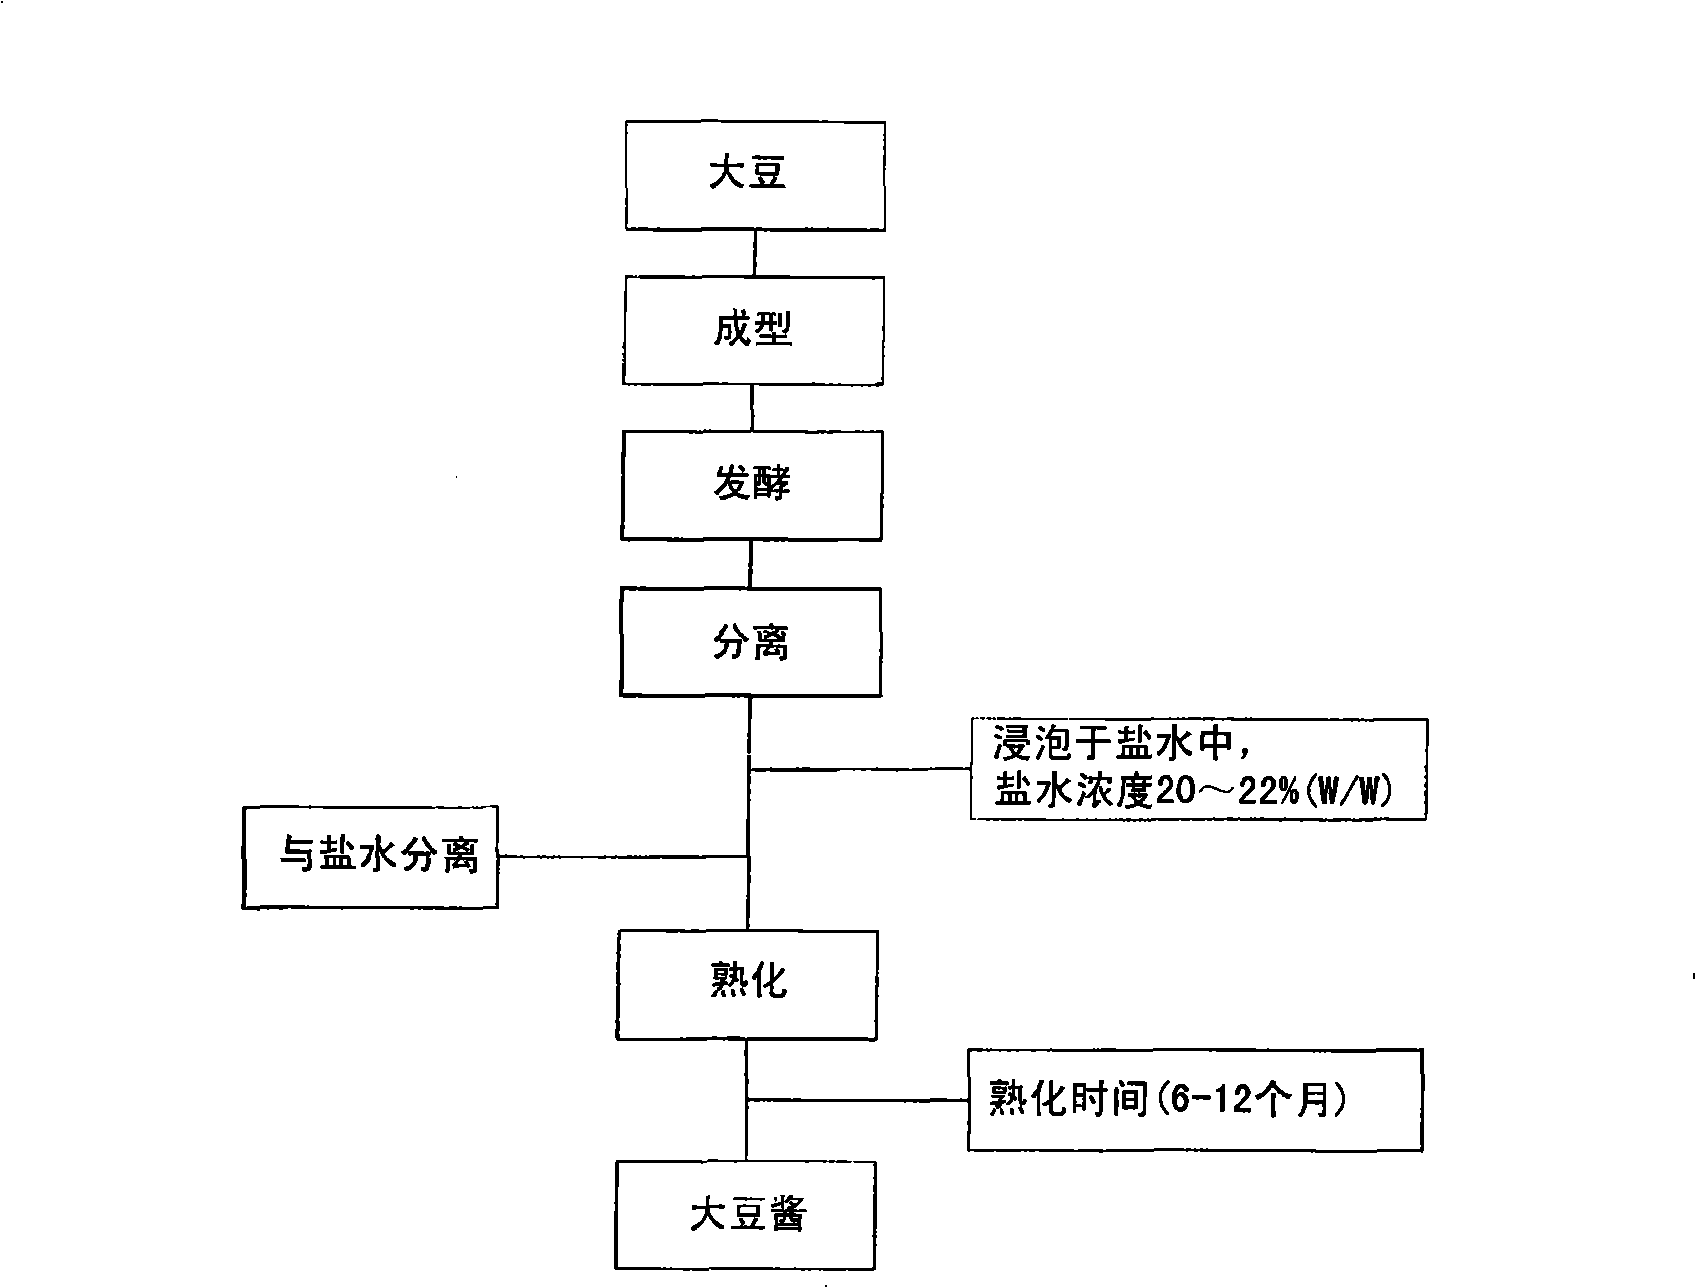 Manufacturing method of soybean paste by protease and its processed products